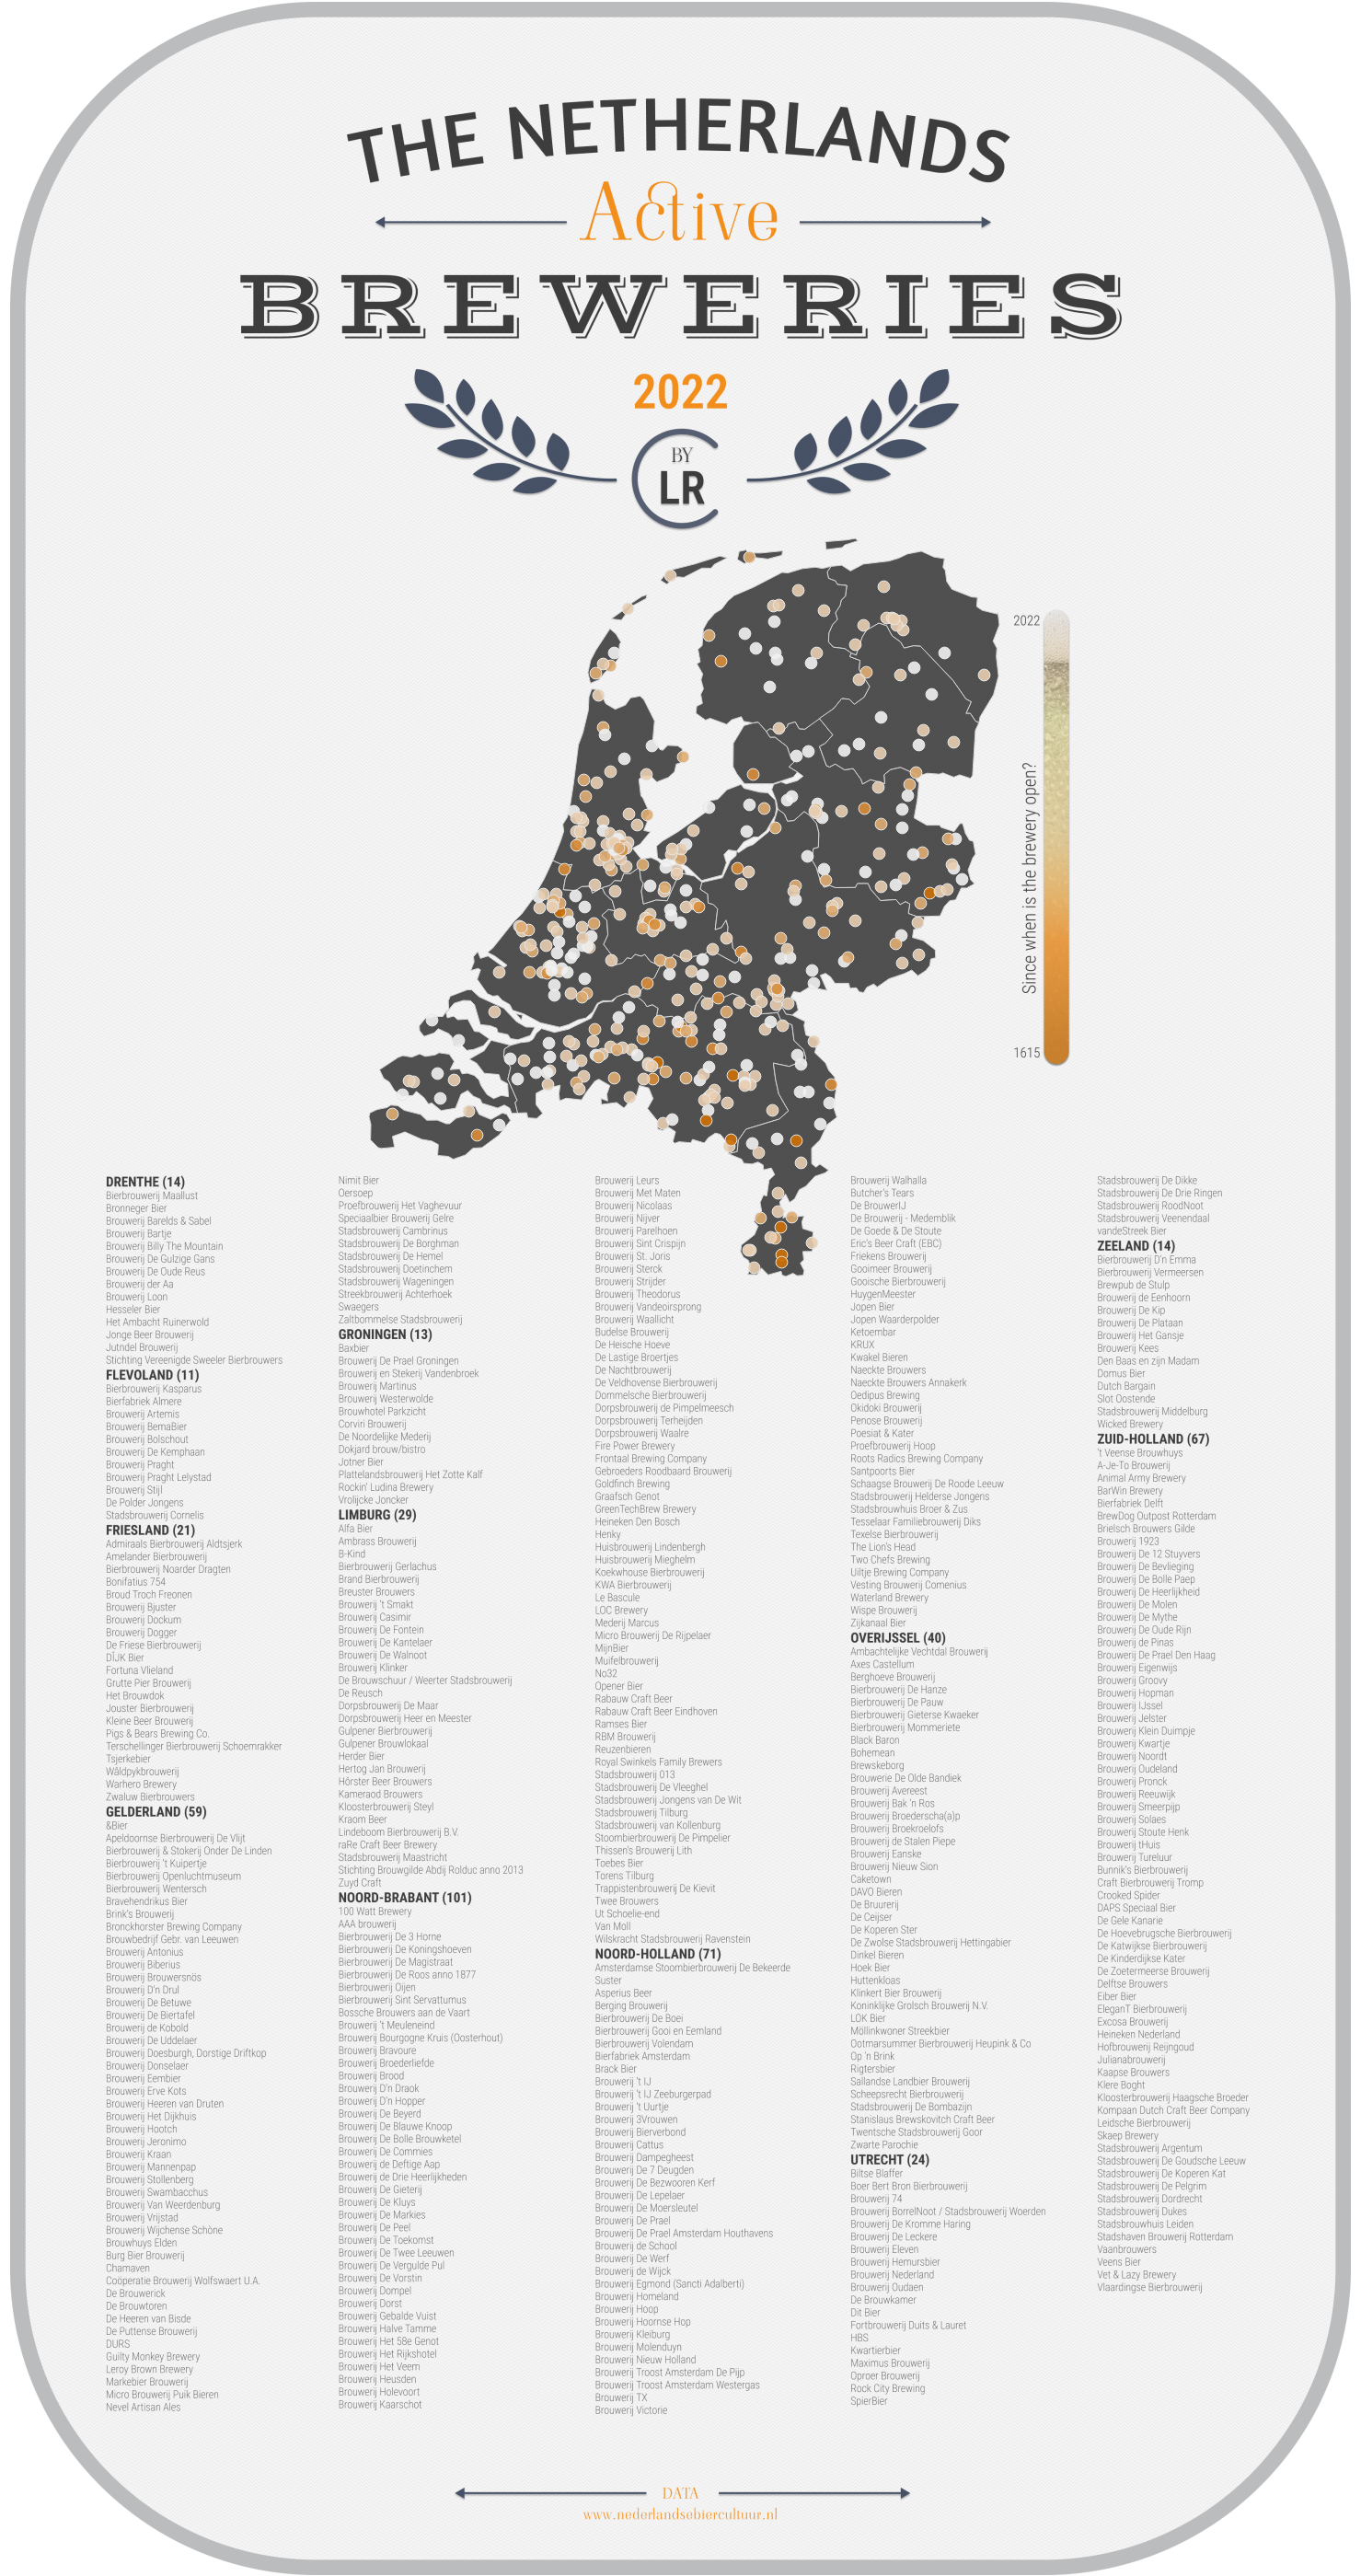 The Netherlands active breweries in 2022